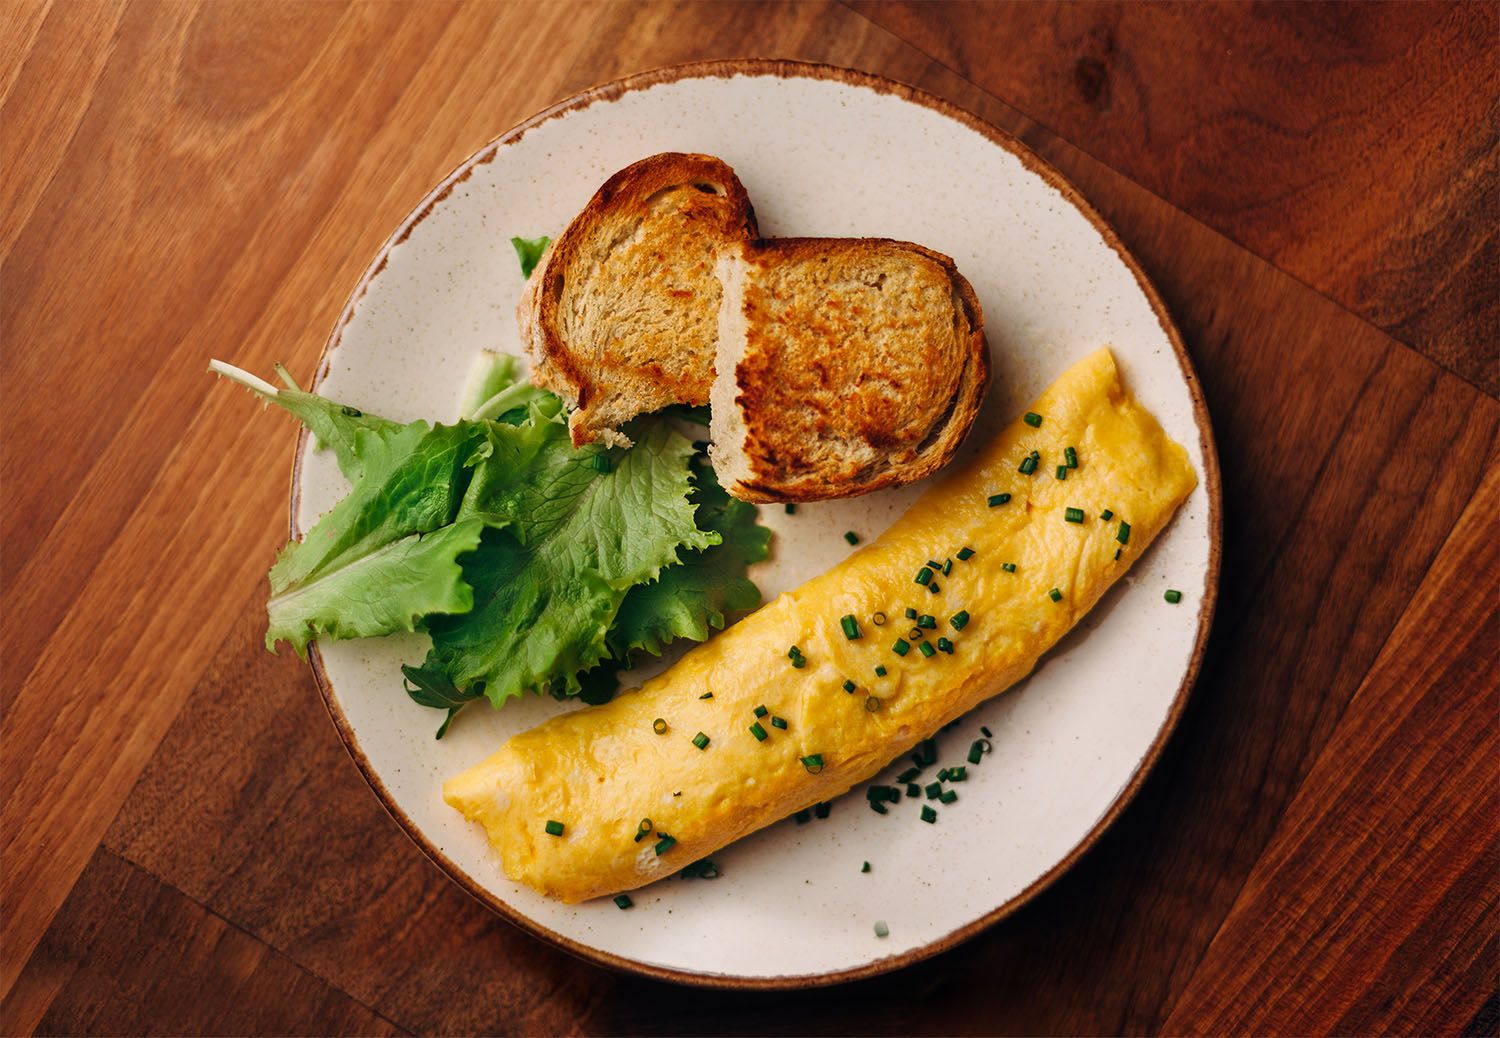 Chefs' Tips for Making a Classic French Omelette